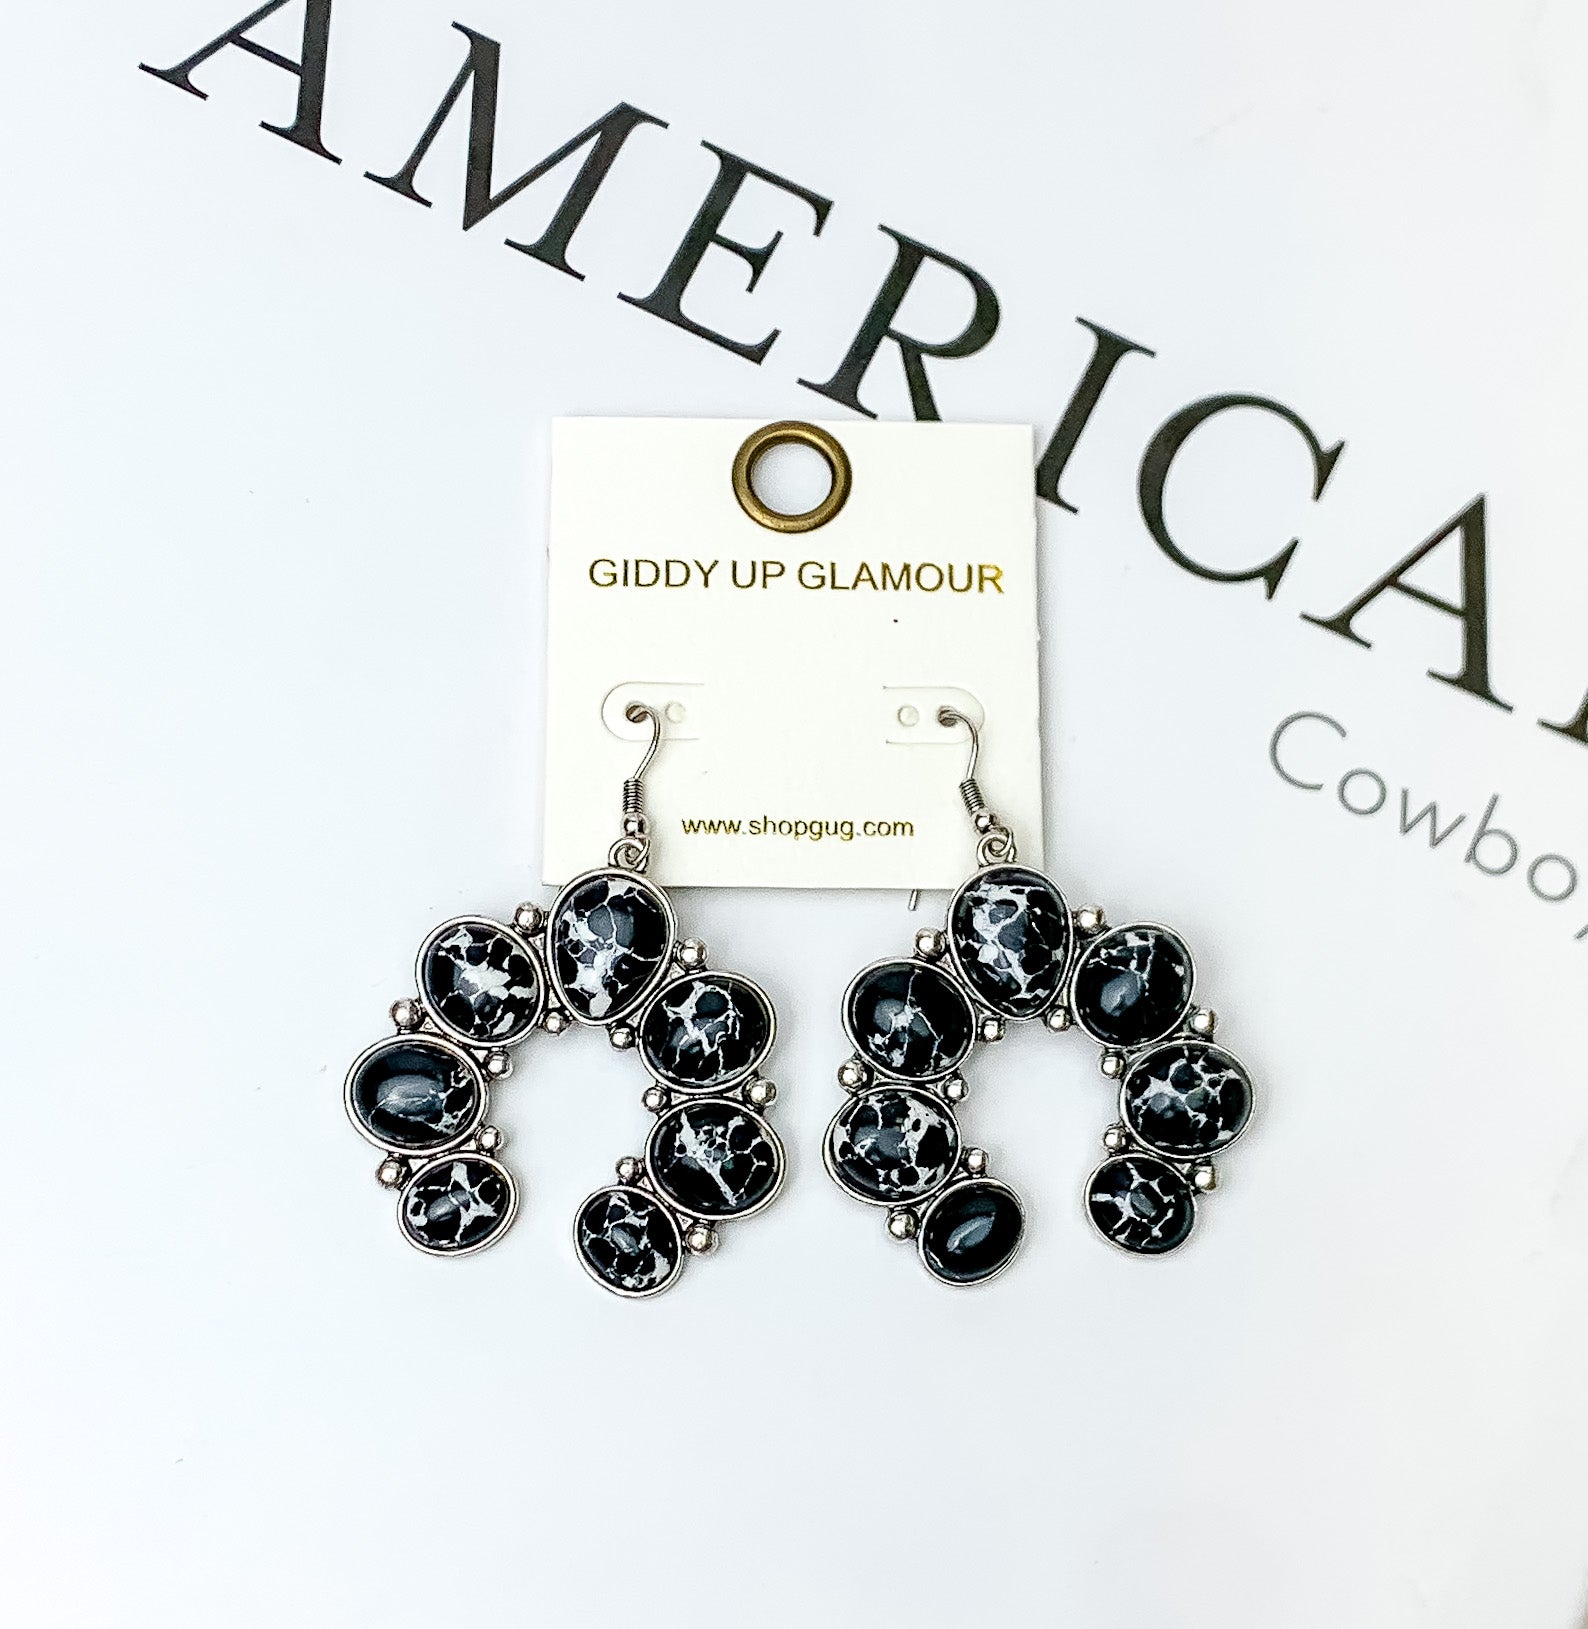 Squash Blossom Stone Earrings In Black. Pictured on a white background with American cowboy written in the background.